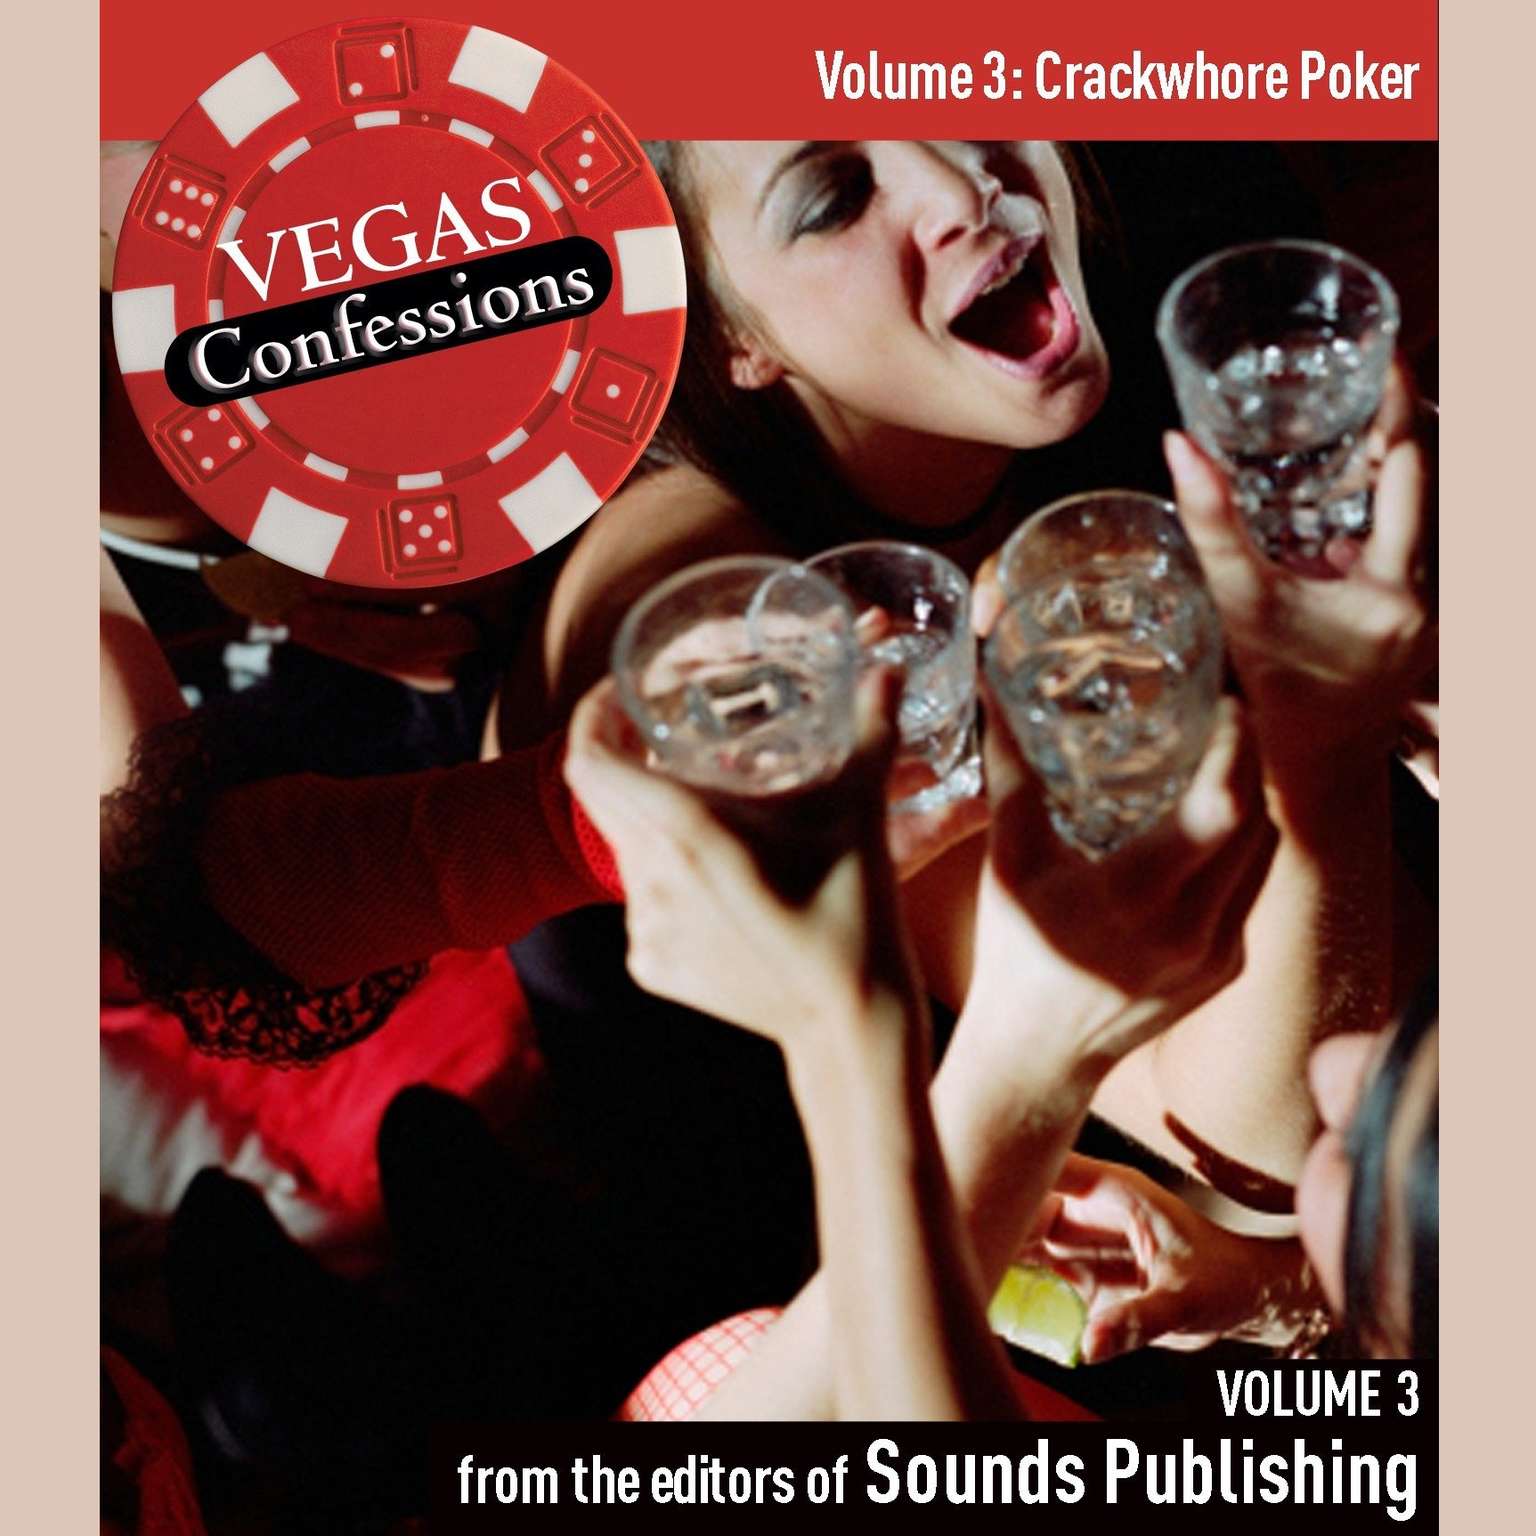 Vegas Confessions 3: Crackwhore Poker Audiobook, by The Editors of Sounds Publishing